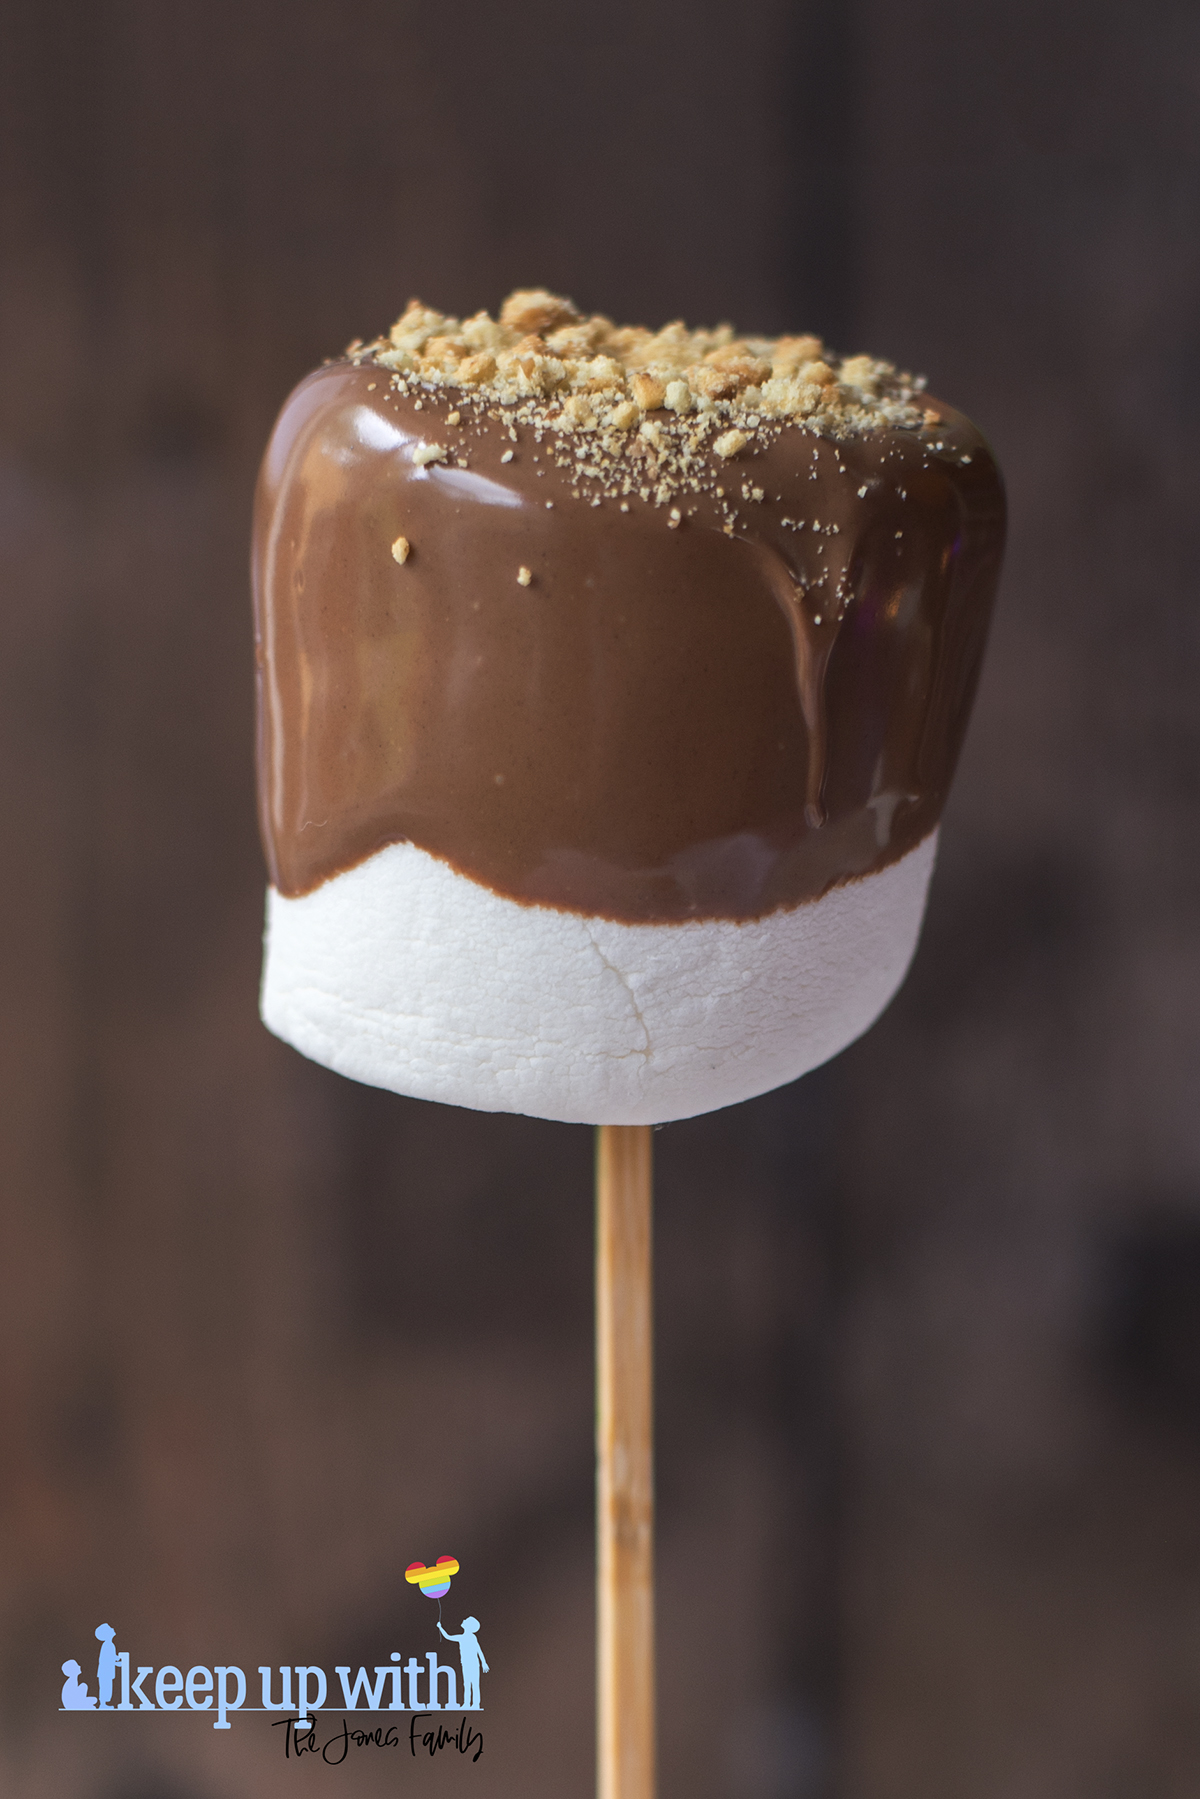 Image shows a large white marshmallow covered in melted milk chocolate and sprinkles with digestive biscuit crumbs. Image by keep up with the jones family.